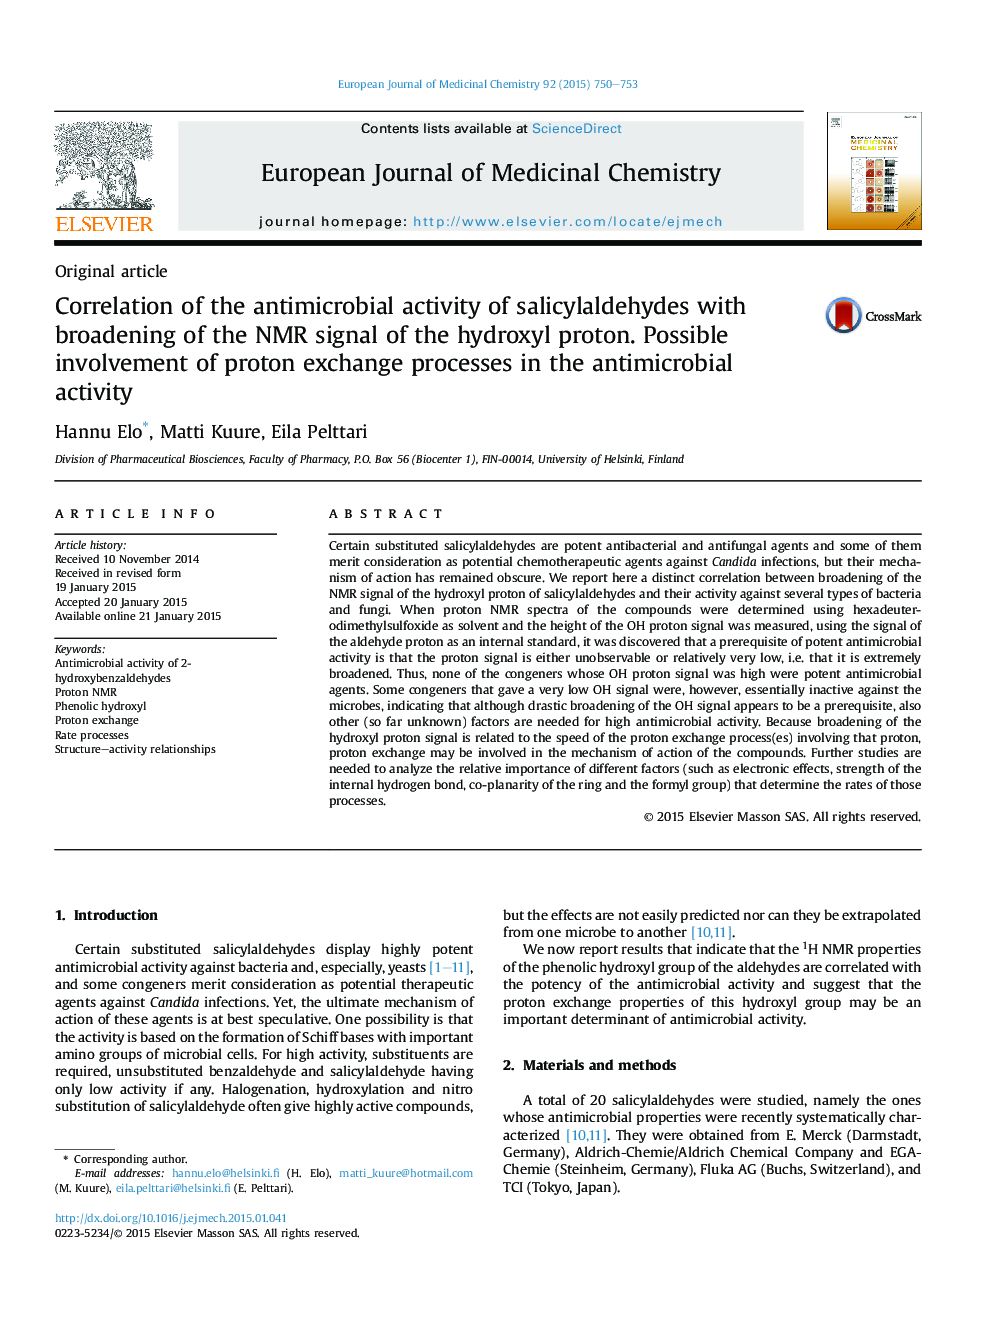 Correlation of the antimicrobial activity of salicylaldehydes with broadening of the NMR signal of the hydroxyl proton. Possible involvement of proton exchange processes in the antimicrobial activity